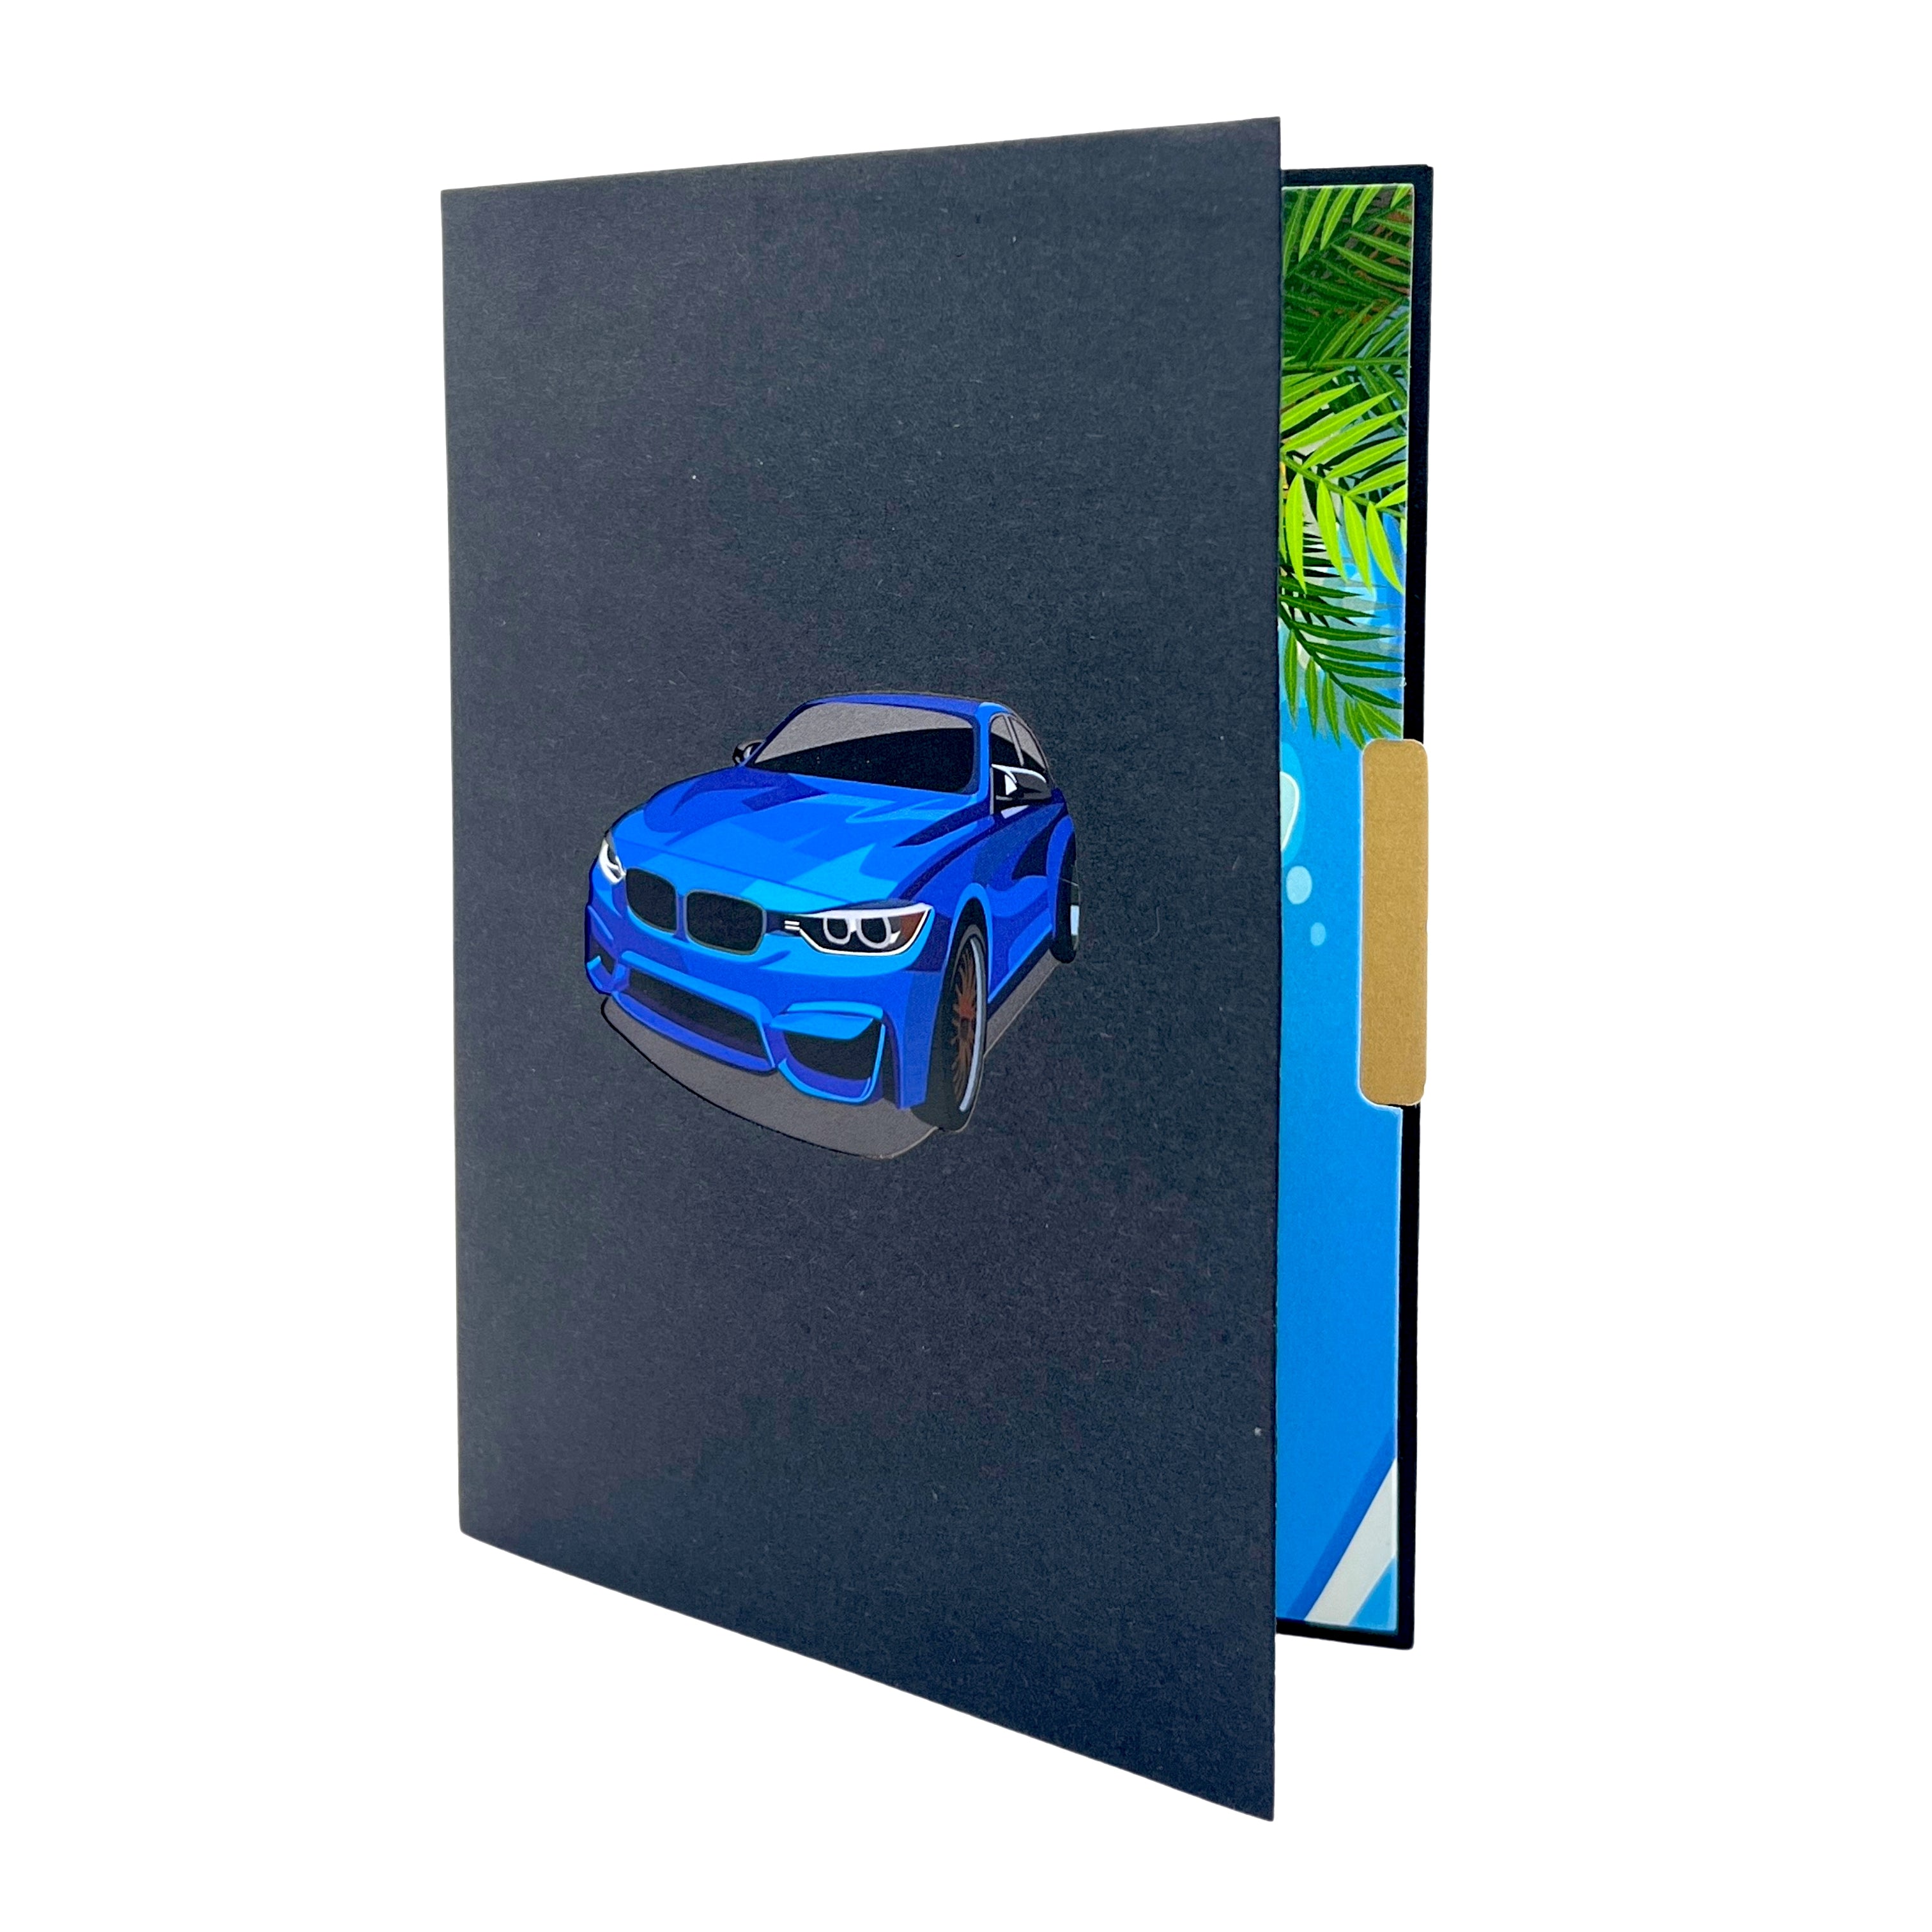 Pop Up Greeting Card Luxury Wealthy Thank You Card First Car Congratulation Birthday Gift Thank you Gift for Dad Husband Friend New Car Fun